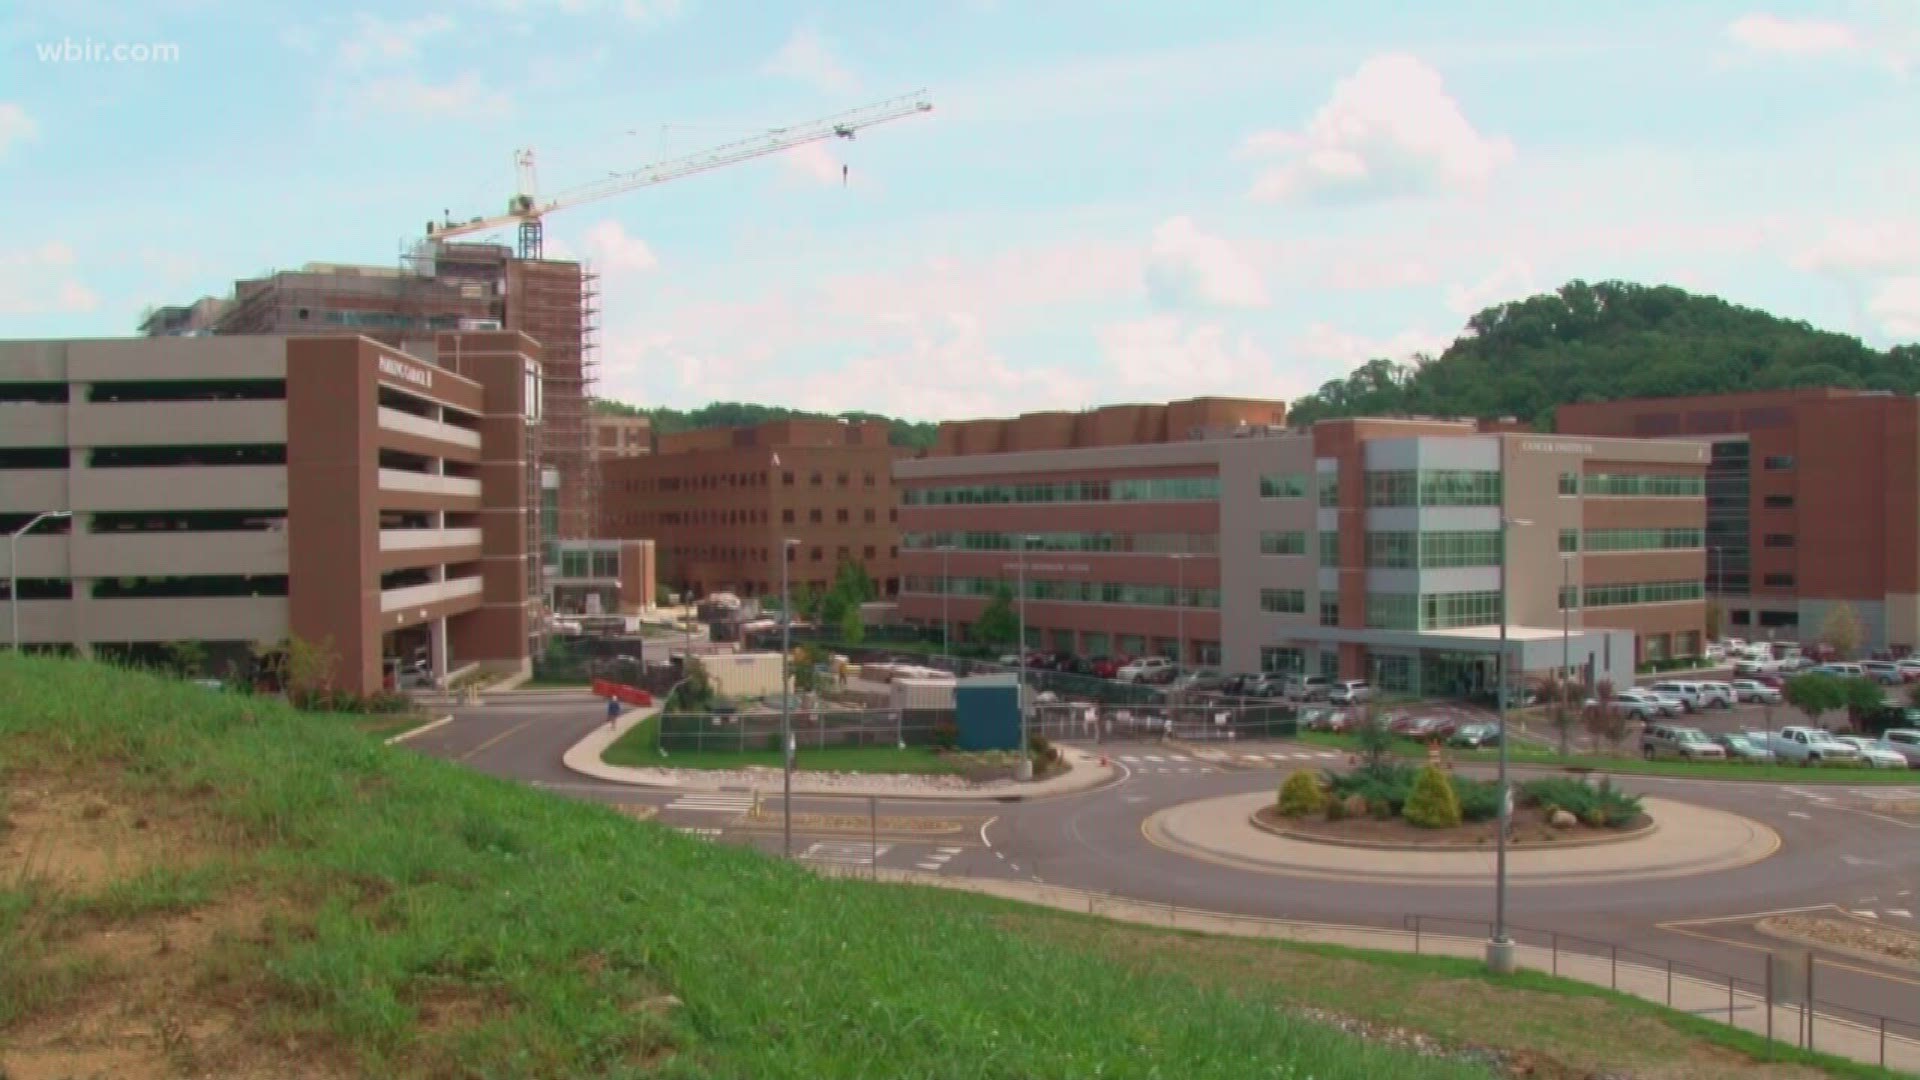 UT Medical is the first hospital in the state of Tennessee to receive this honor. That certification will last for 2 years.